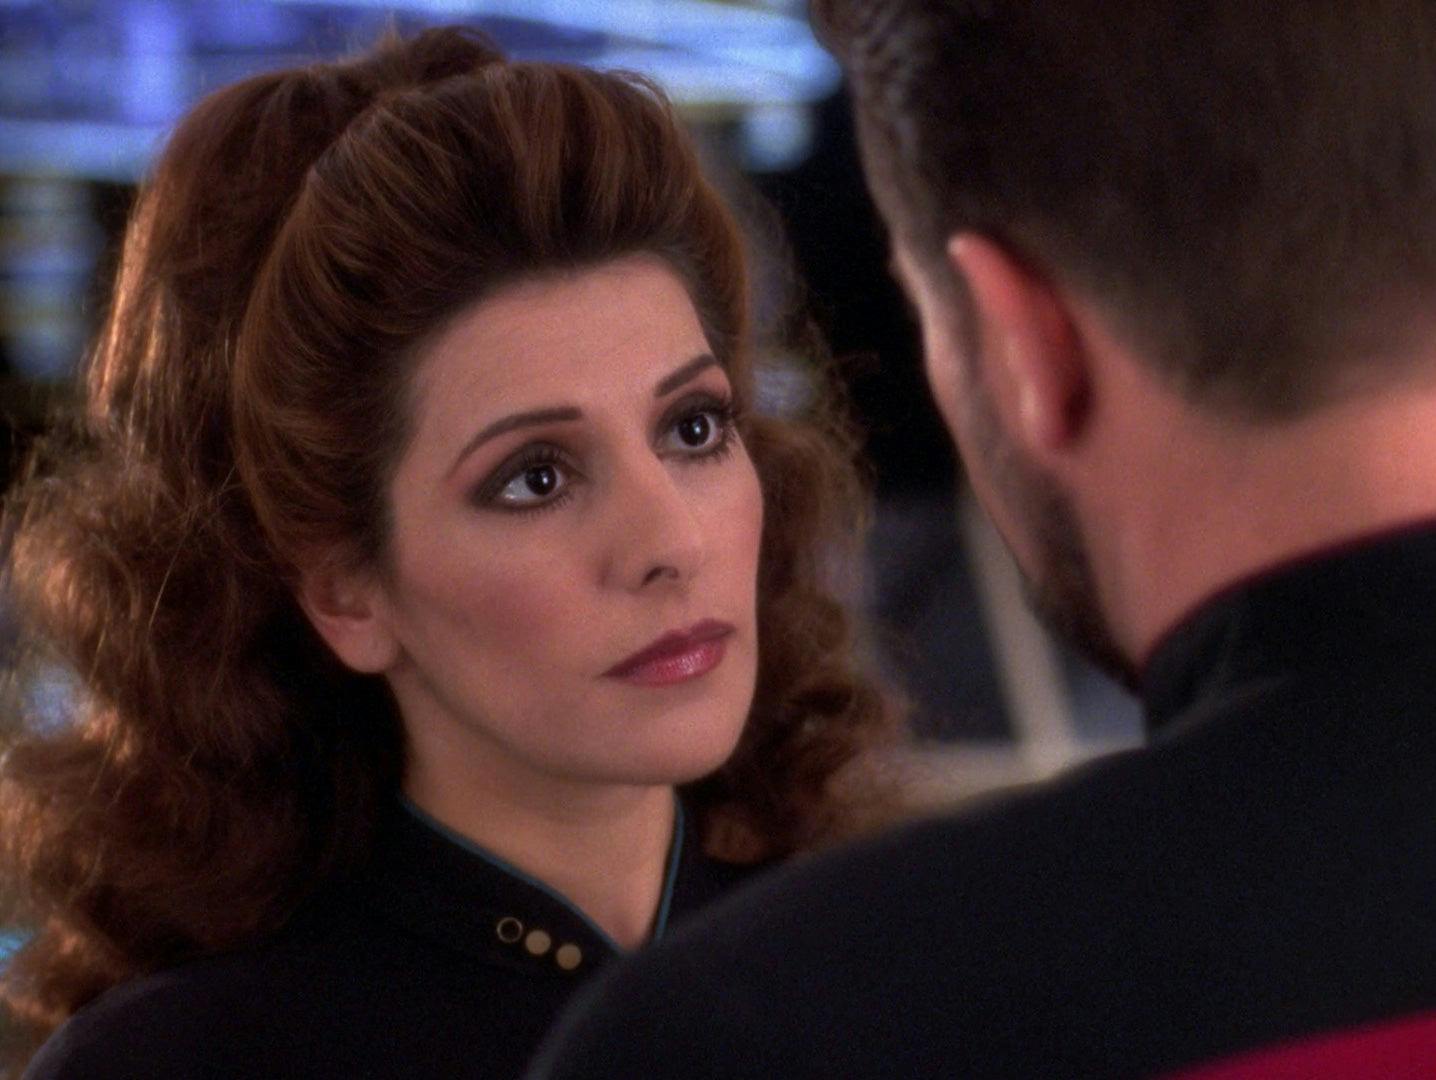 Counselor Deanna Troi looks up at Riker with a stoic expression on her face in 'Thine Own Self'